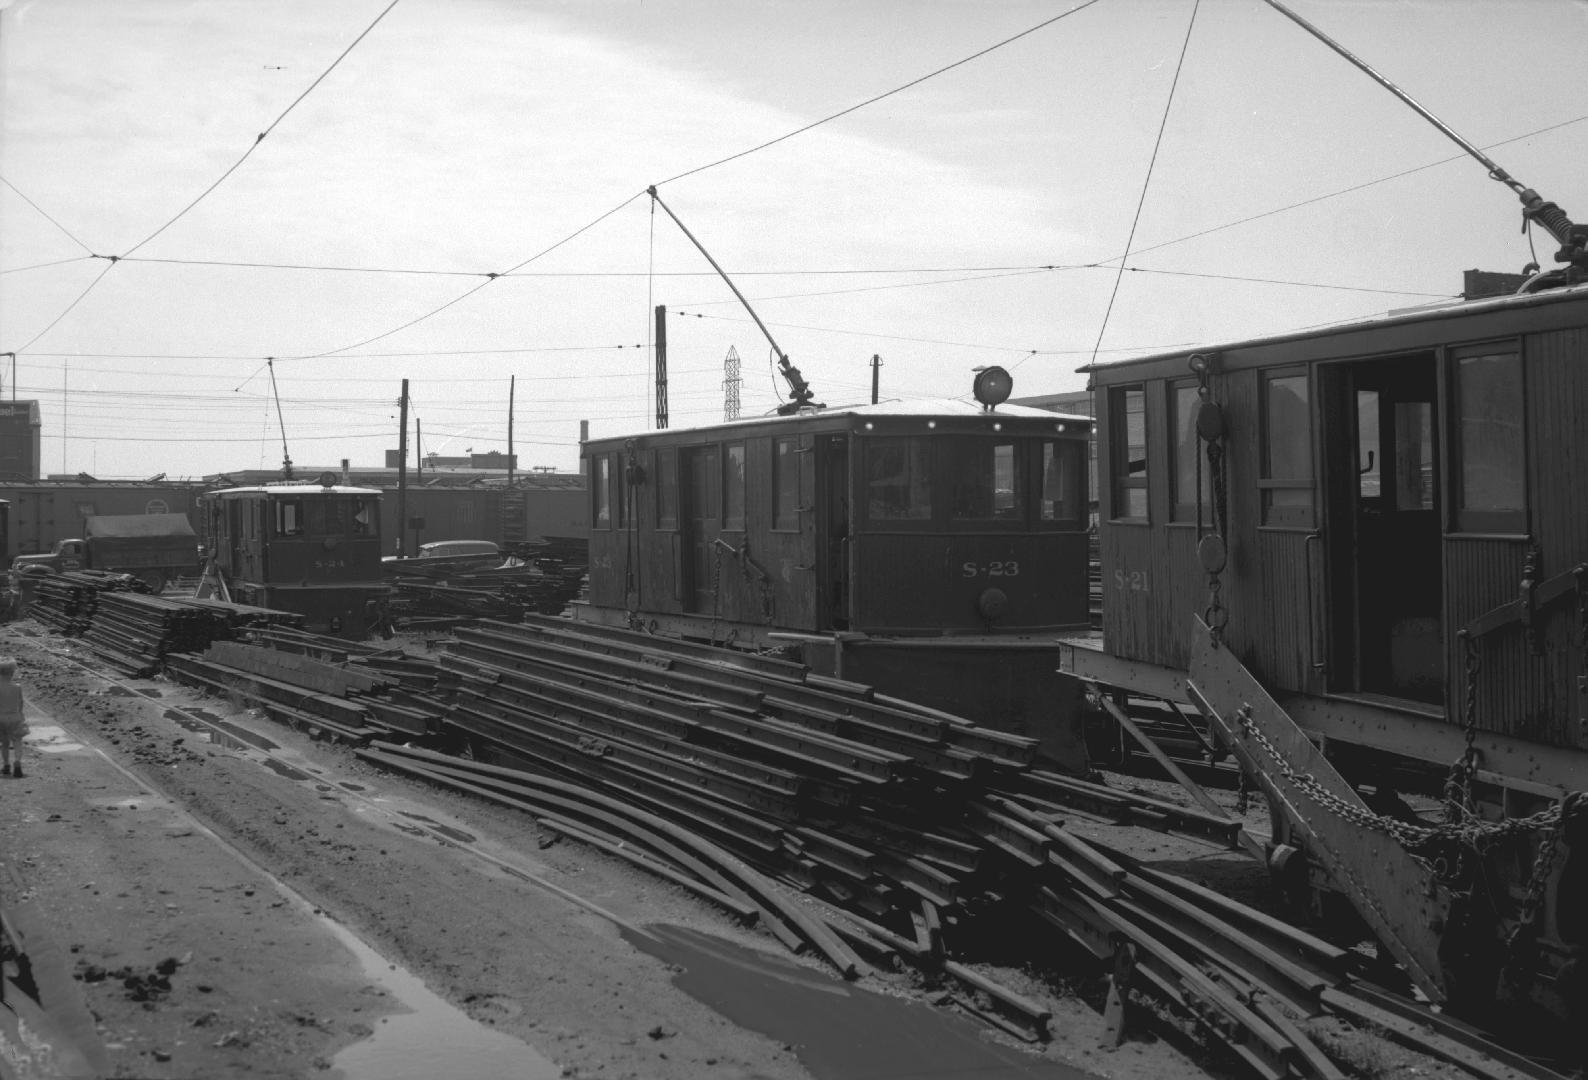 T.T.C., #s S-21, S-23 & S-24, sweepers, being scrapped at George St. yard, looking southwest across Esplanade E